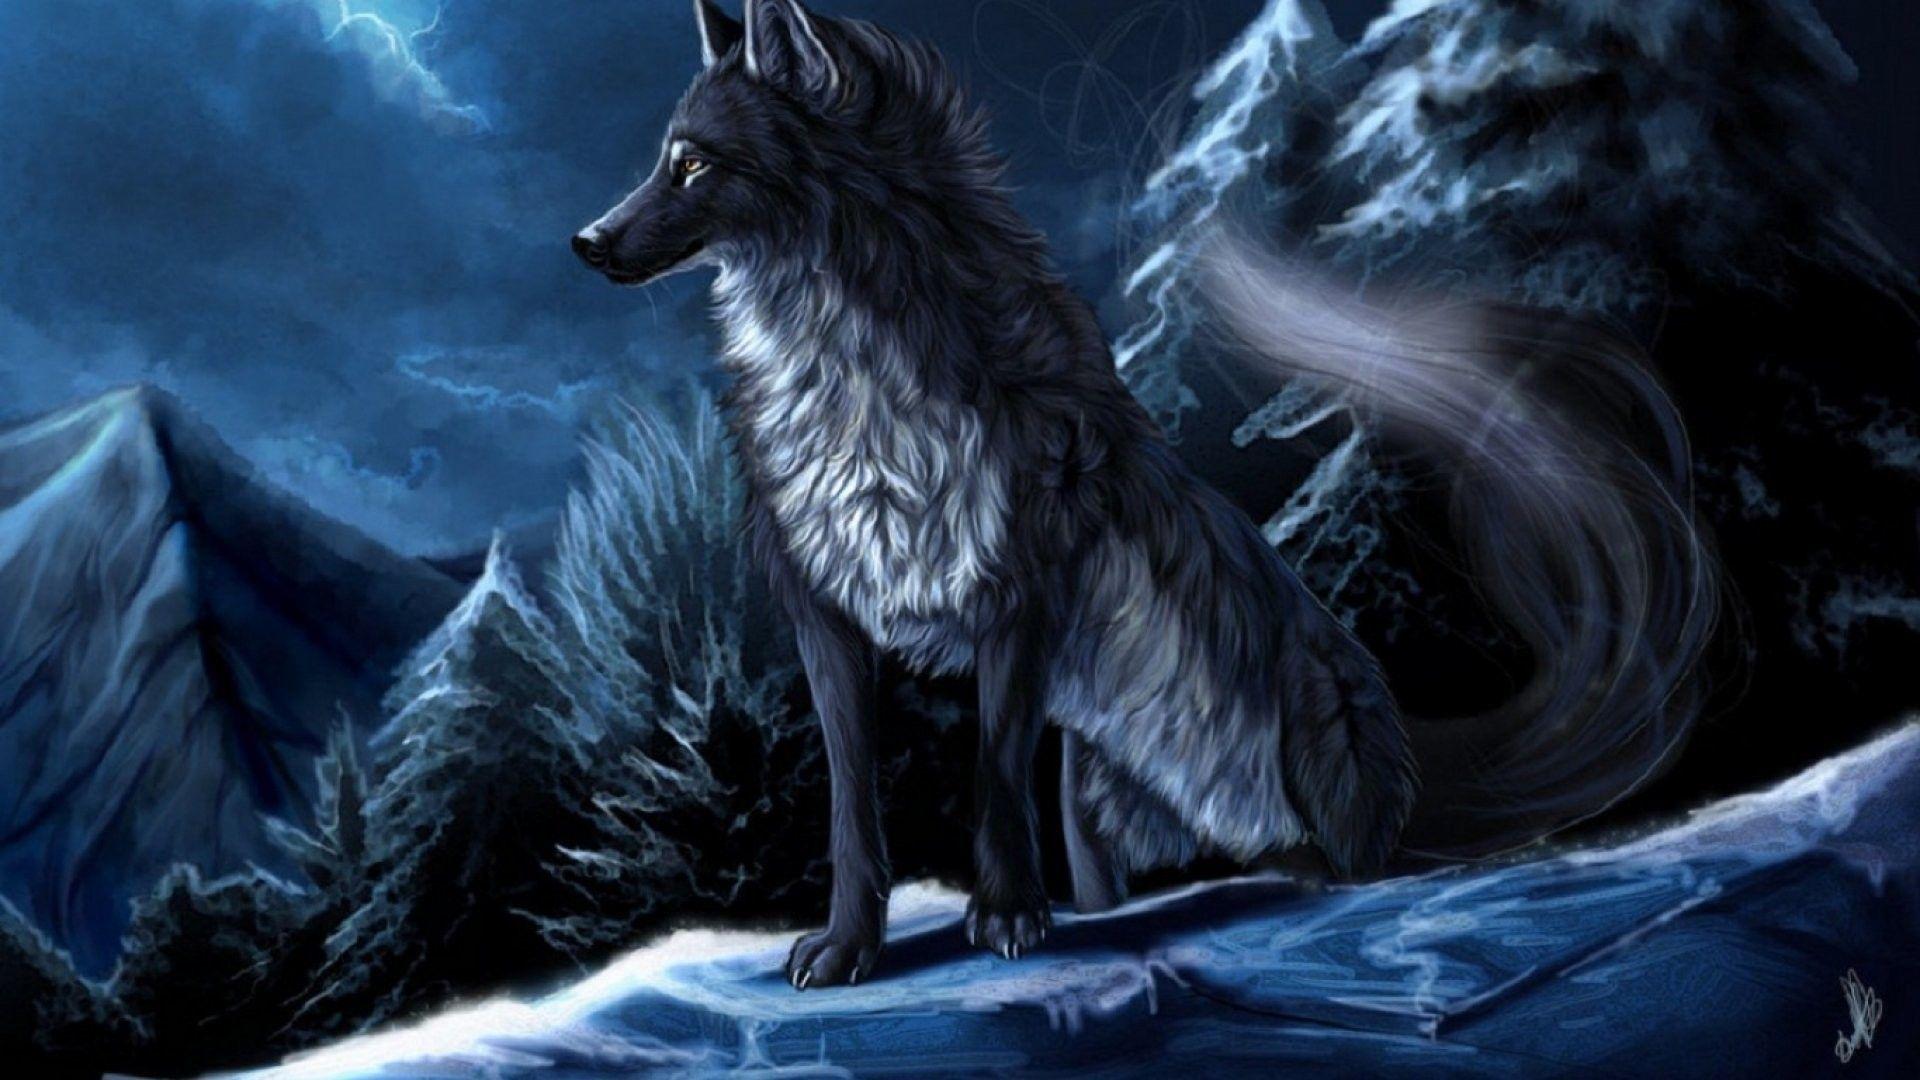 Blue Anime Wolf Wallpapers - Top Free Blue Anime Wolf Backgrounds ...